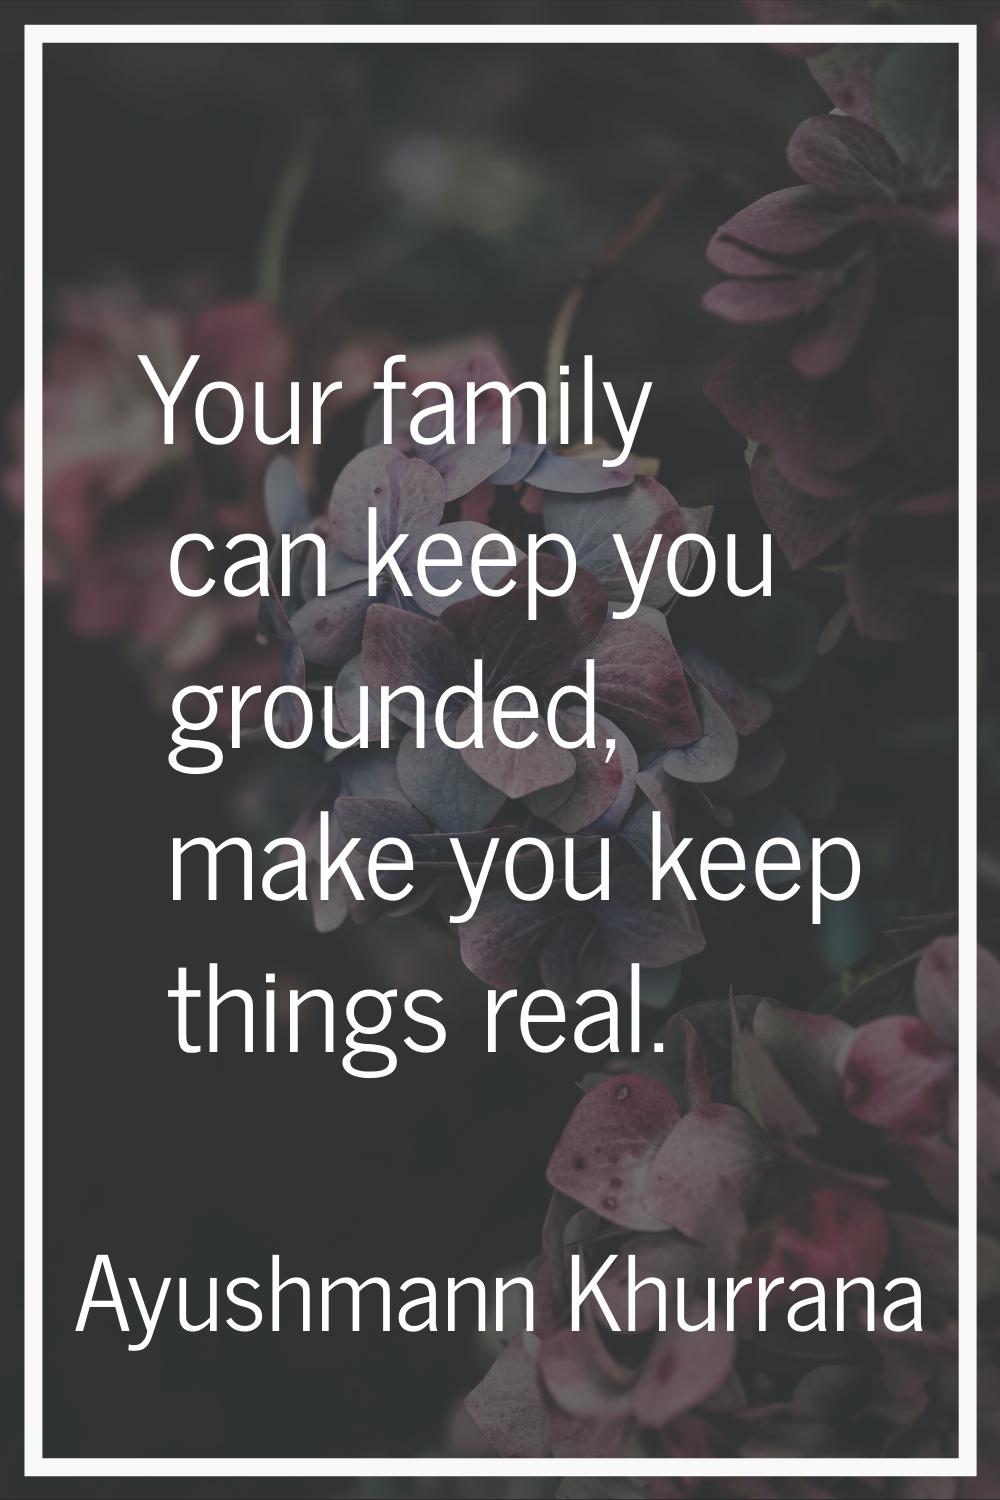 Your family can keep you grounded, make you keep things real.